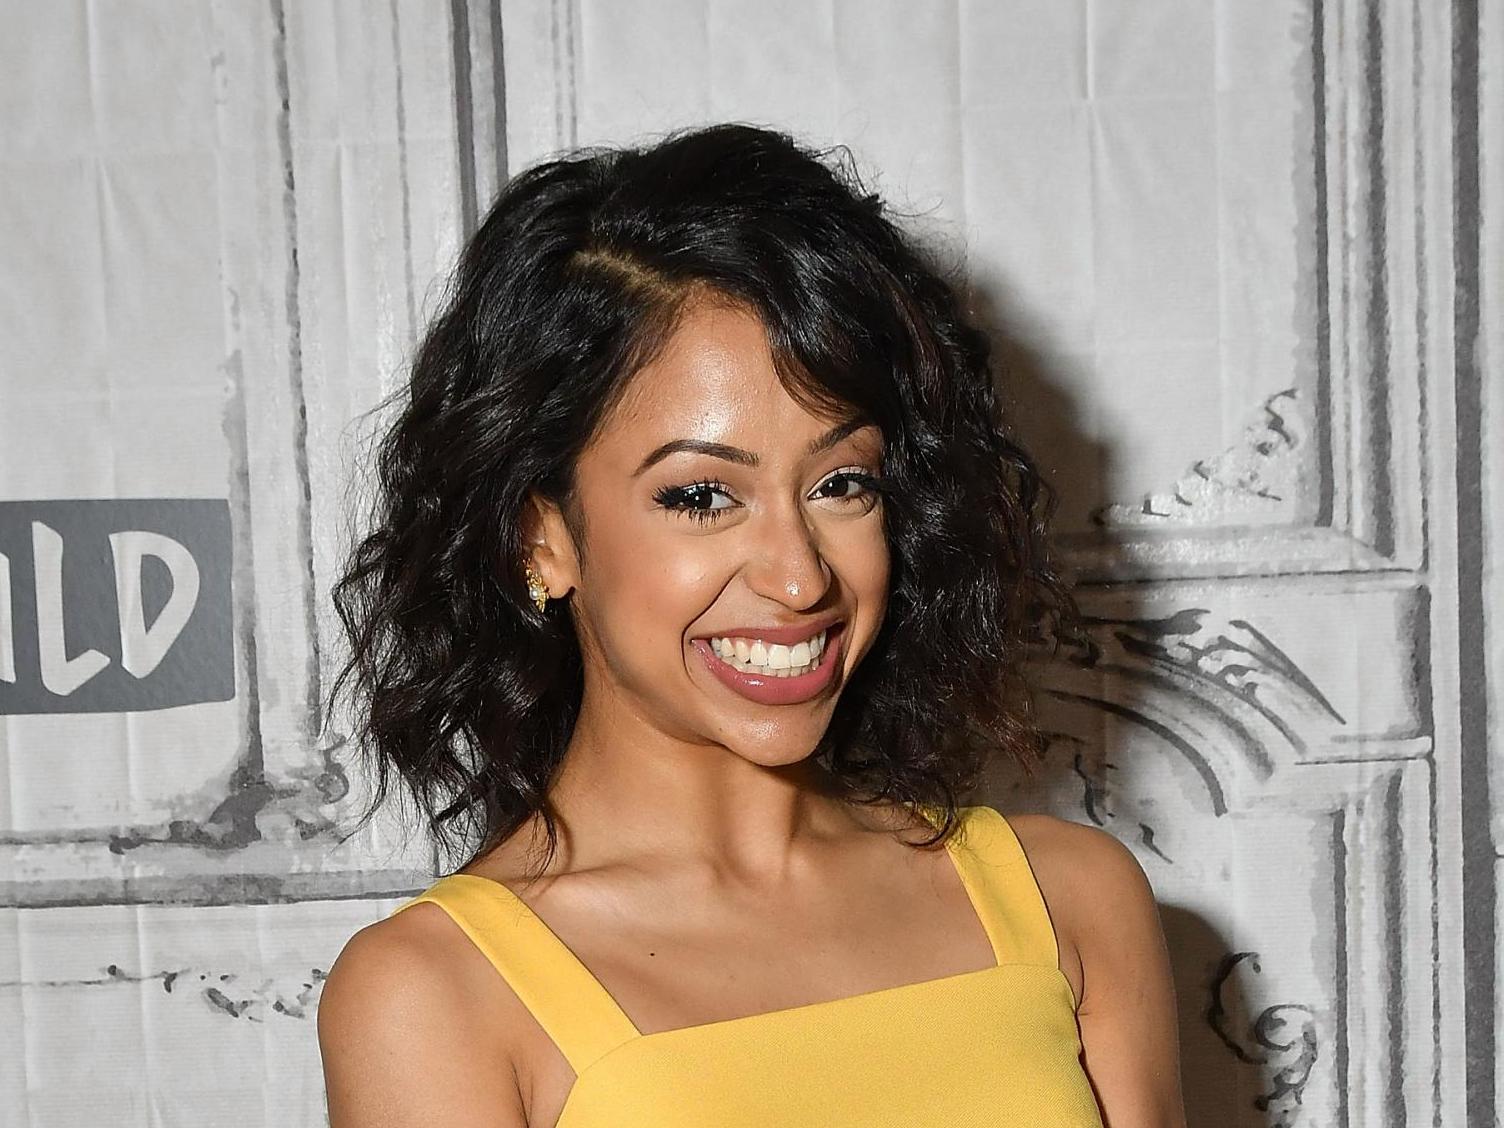 YouTube star Liza Koshy apologises for imitating Asian accent and making up Japanese words in 2016 videos